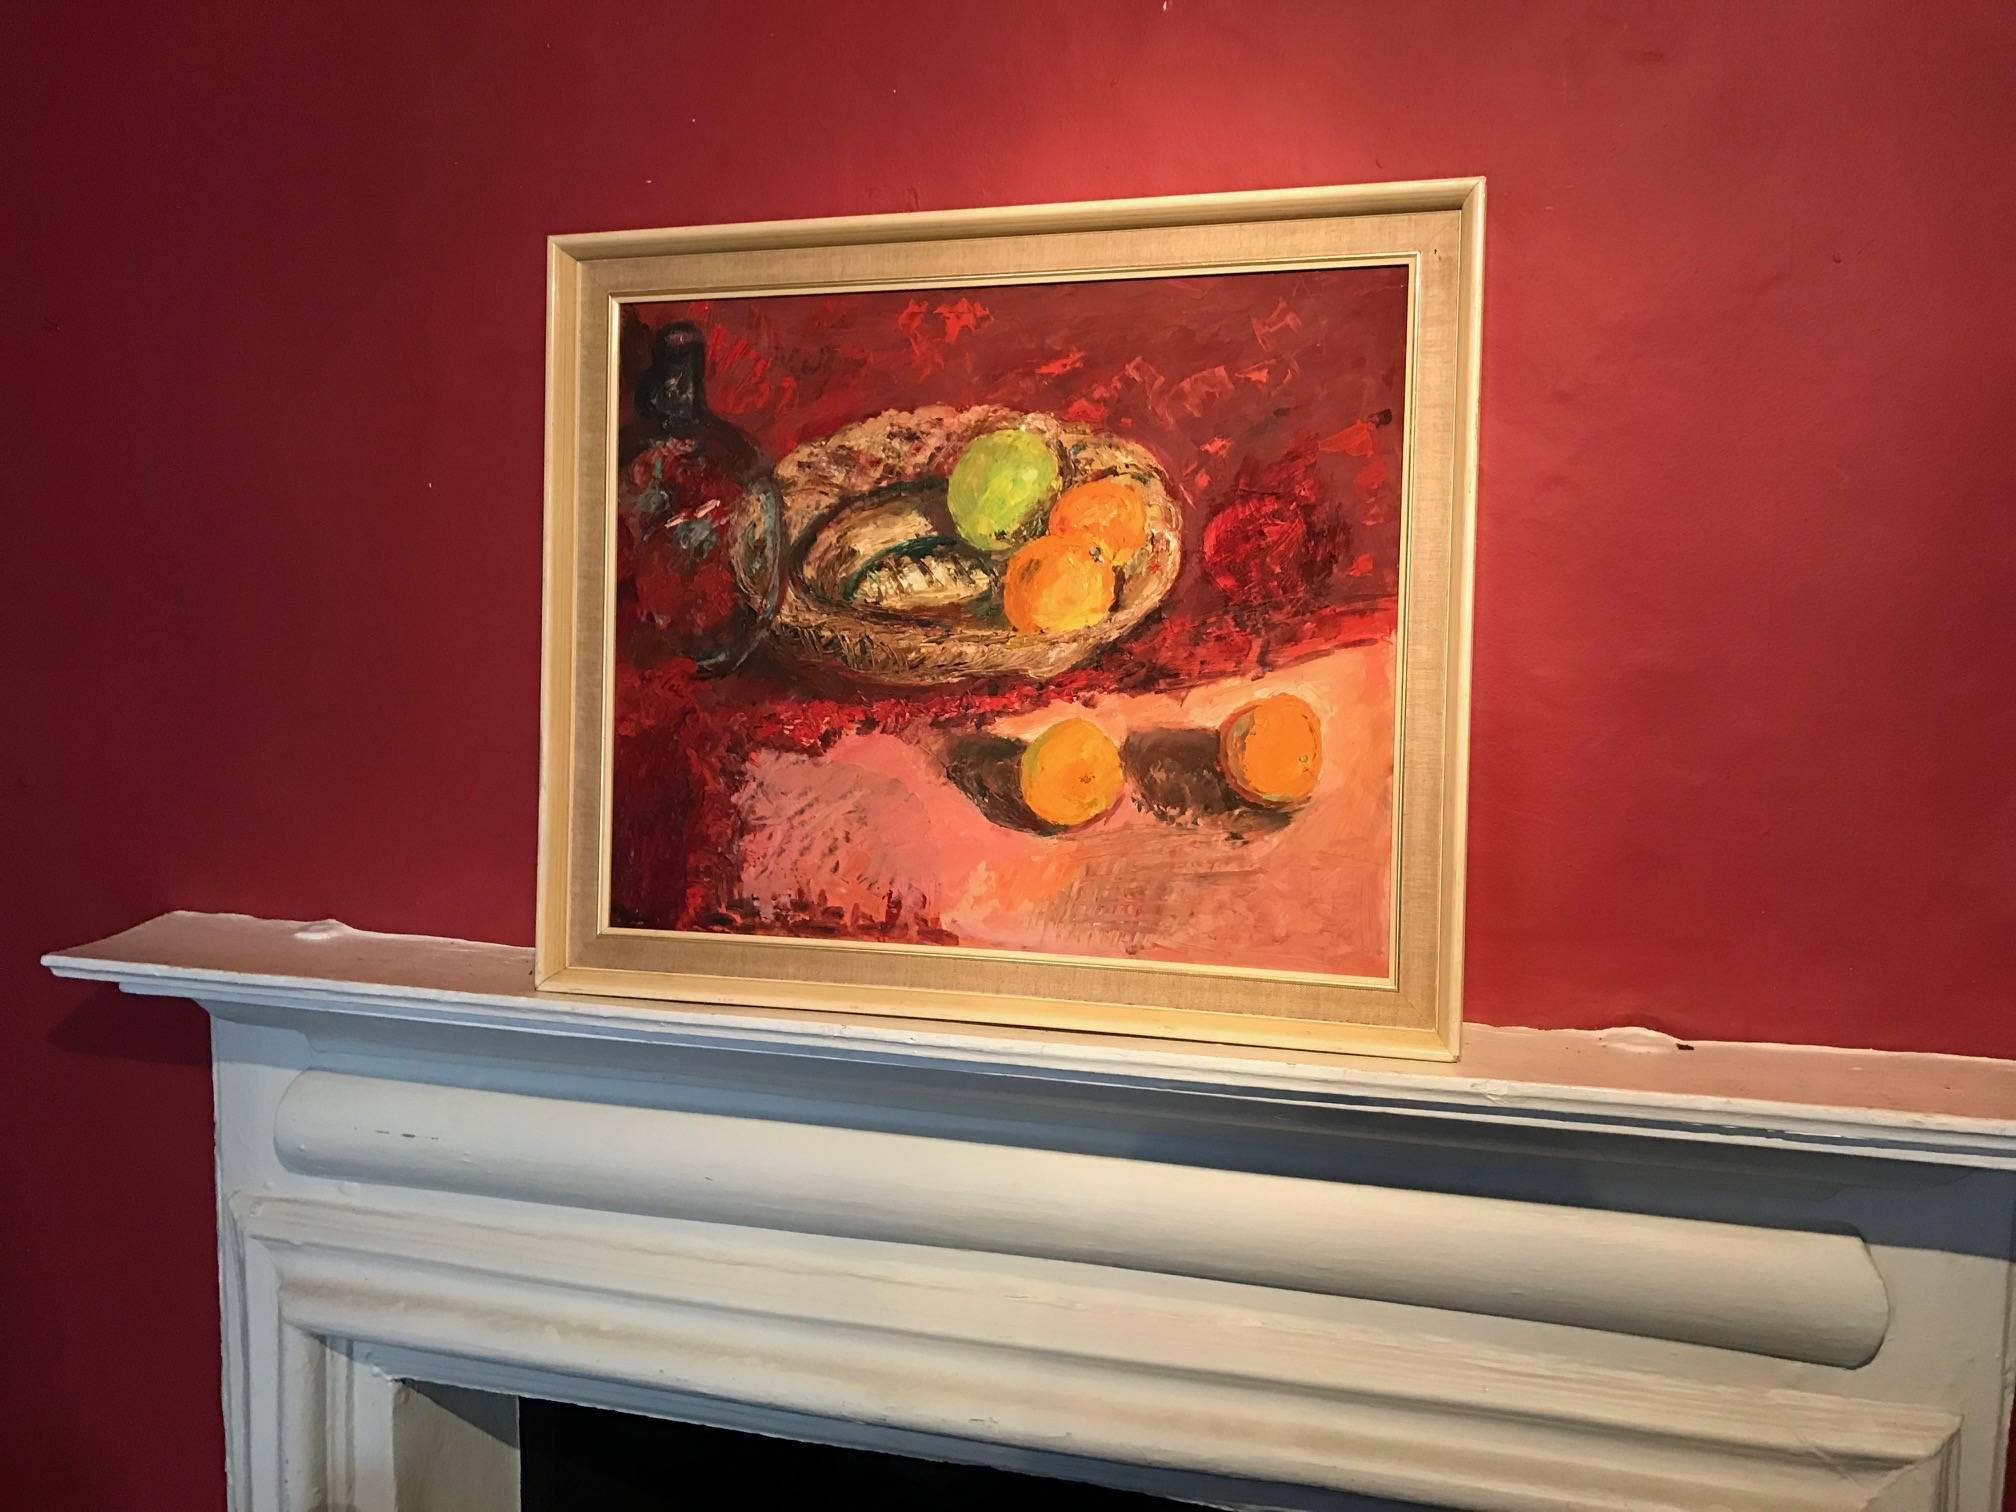 Mid 20thC English Post-Impressionist Still Life Oil - Apple & Oranges - Painting by Unknown